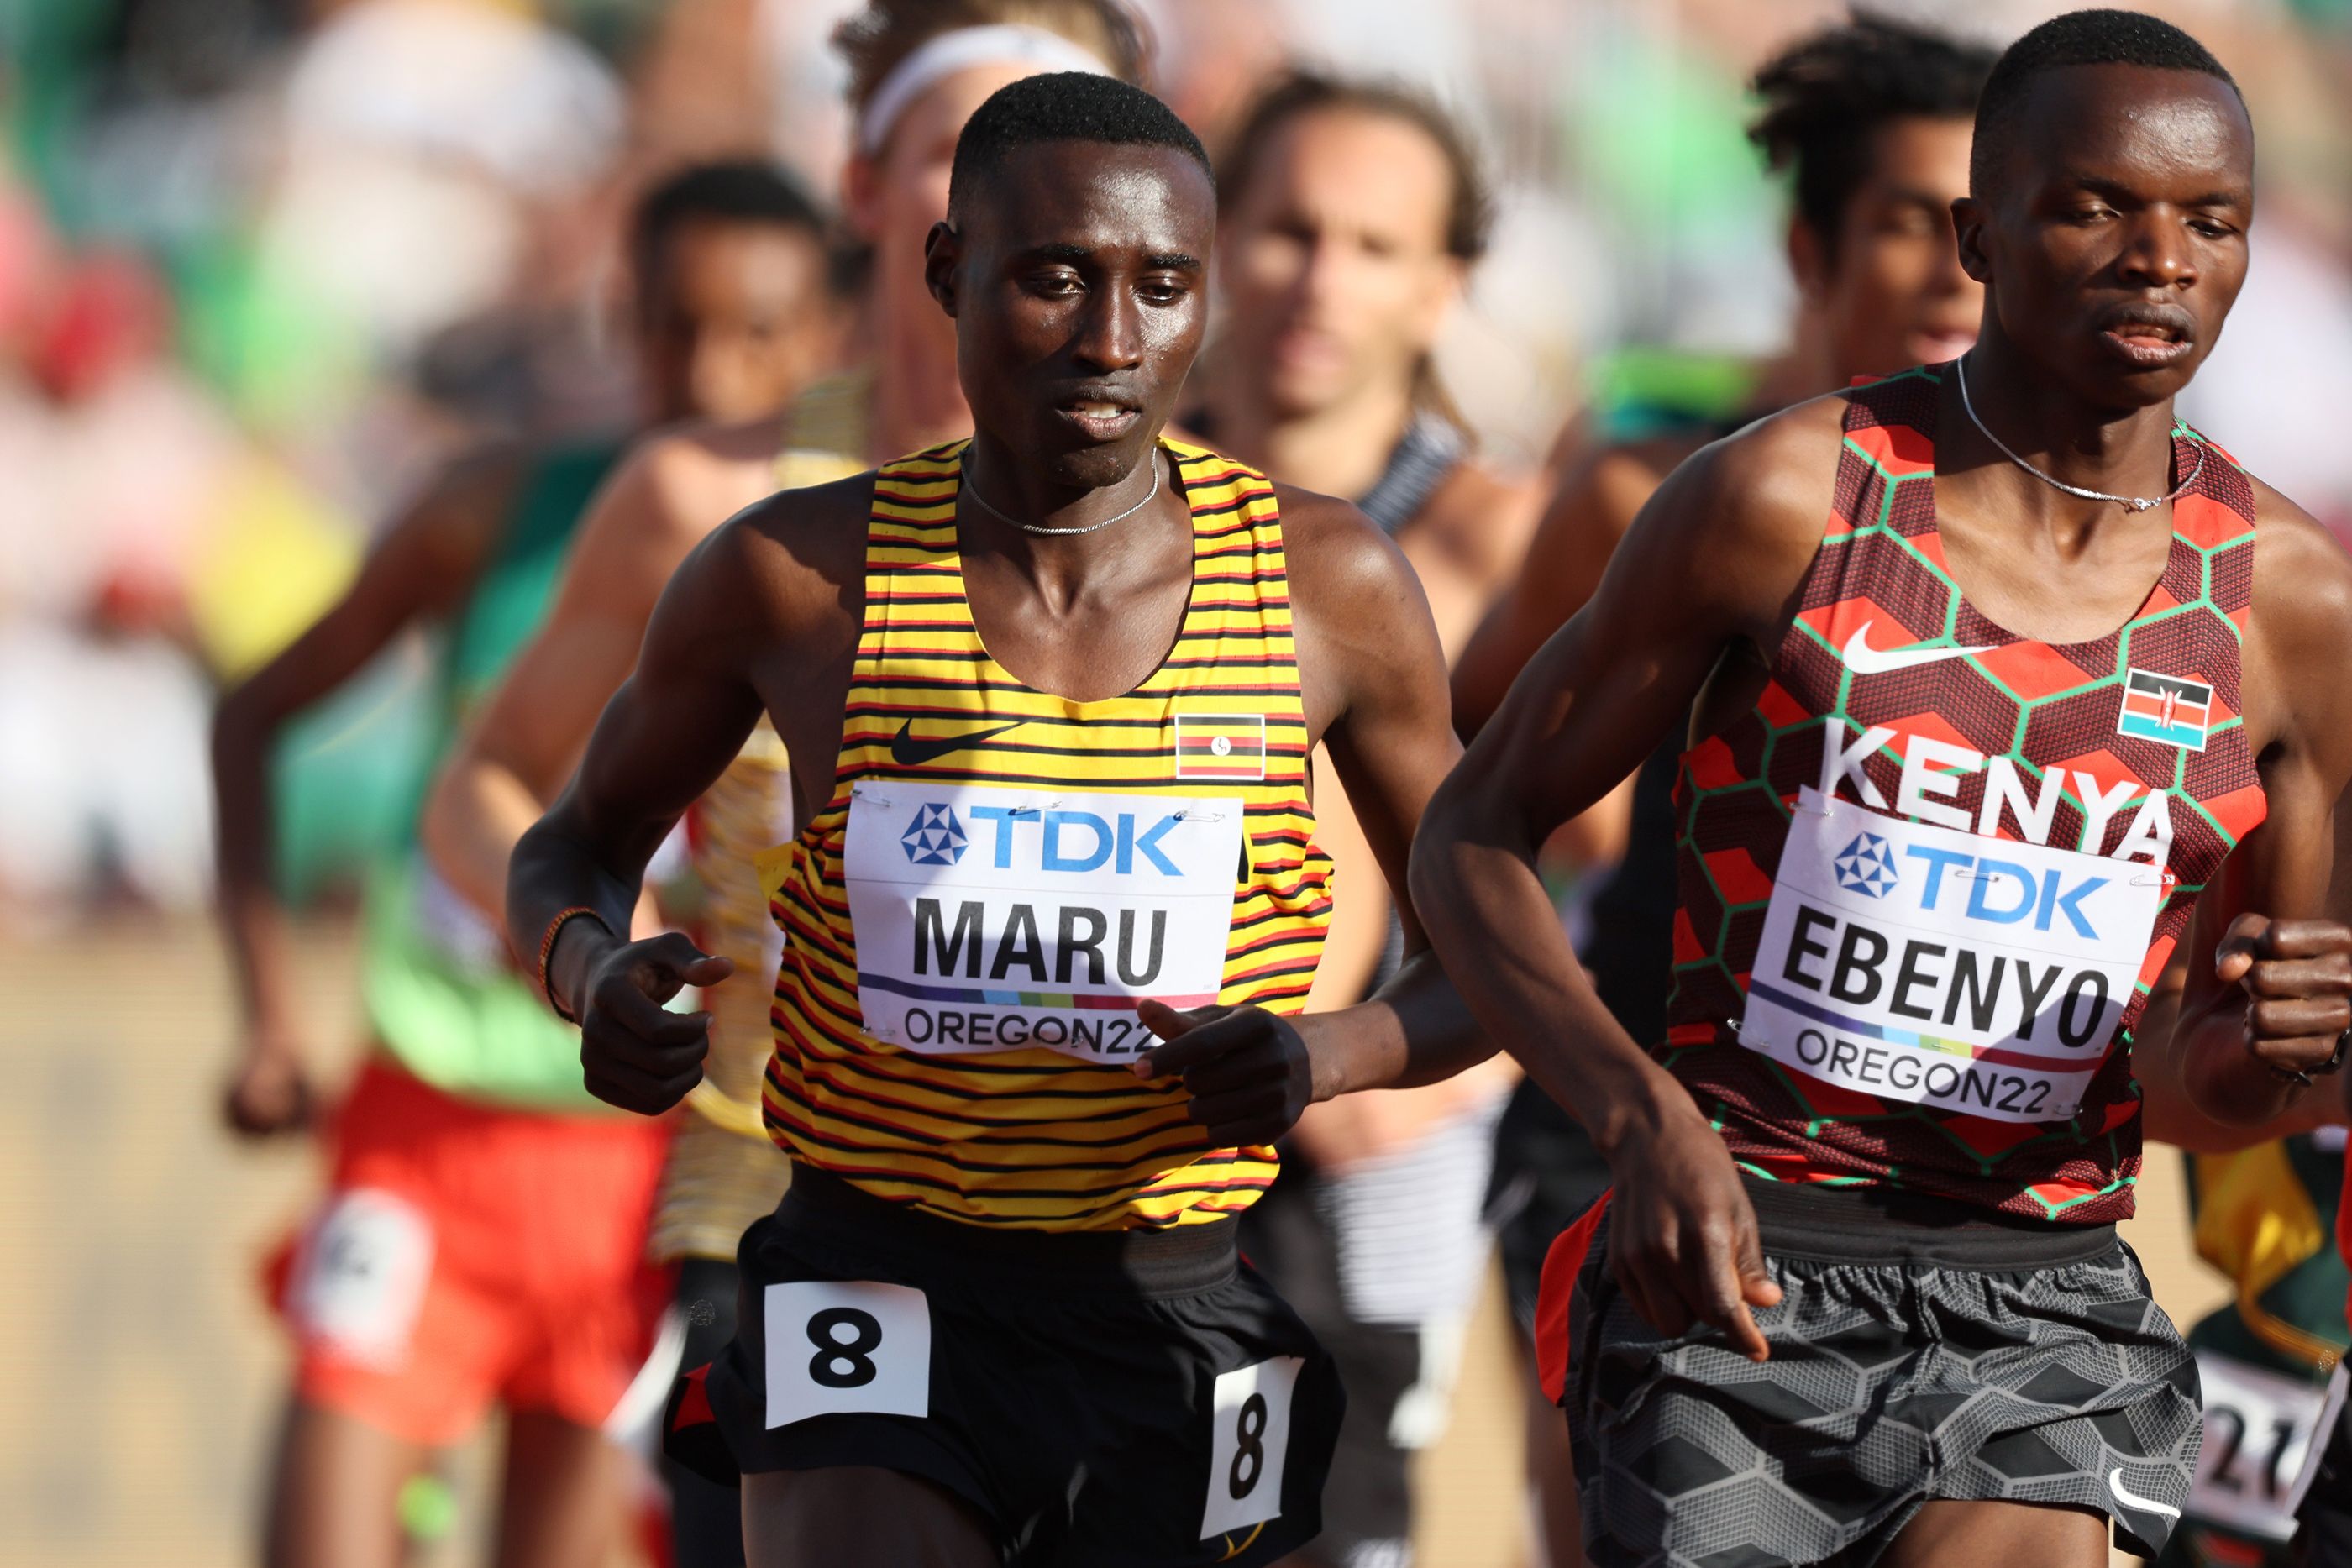 Peter Maru races in the 5000m heats at the World Athletics Championships Oregon22